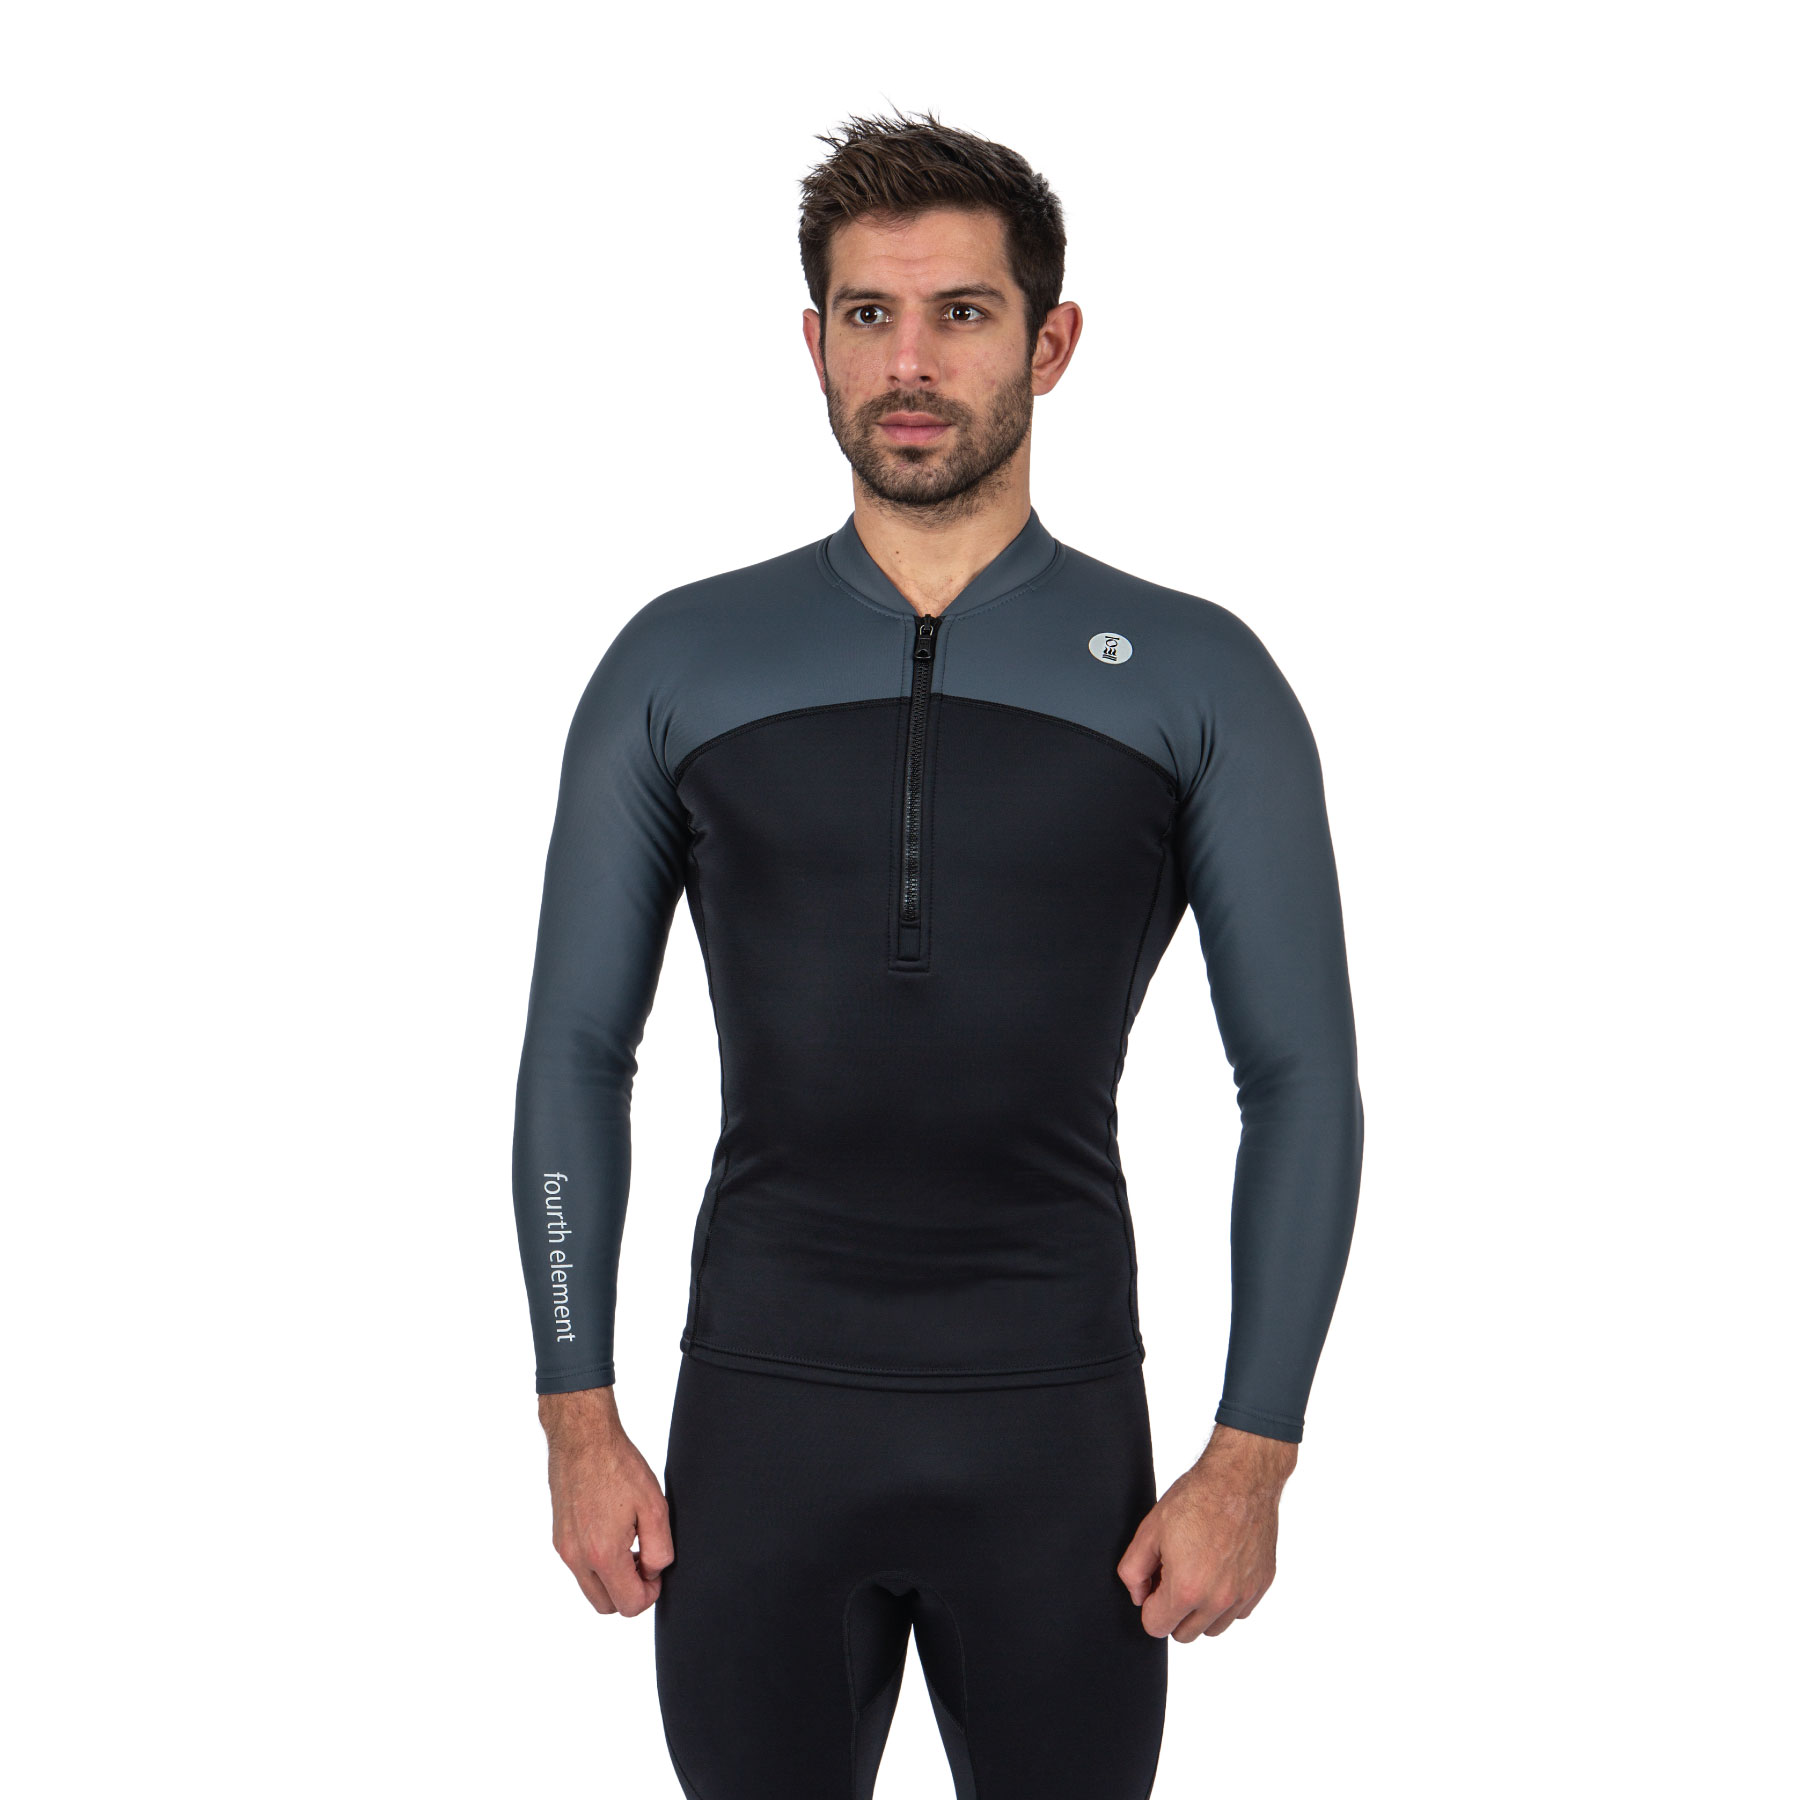 Fourth Element Thermocline Long Sleeve Top | Men's - The Honest Diver